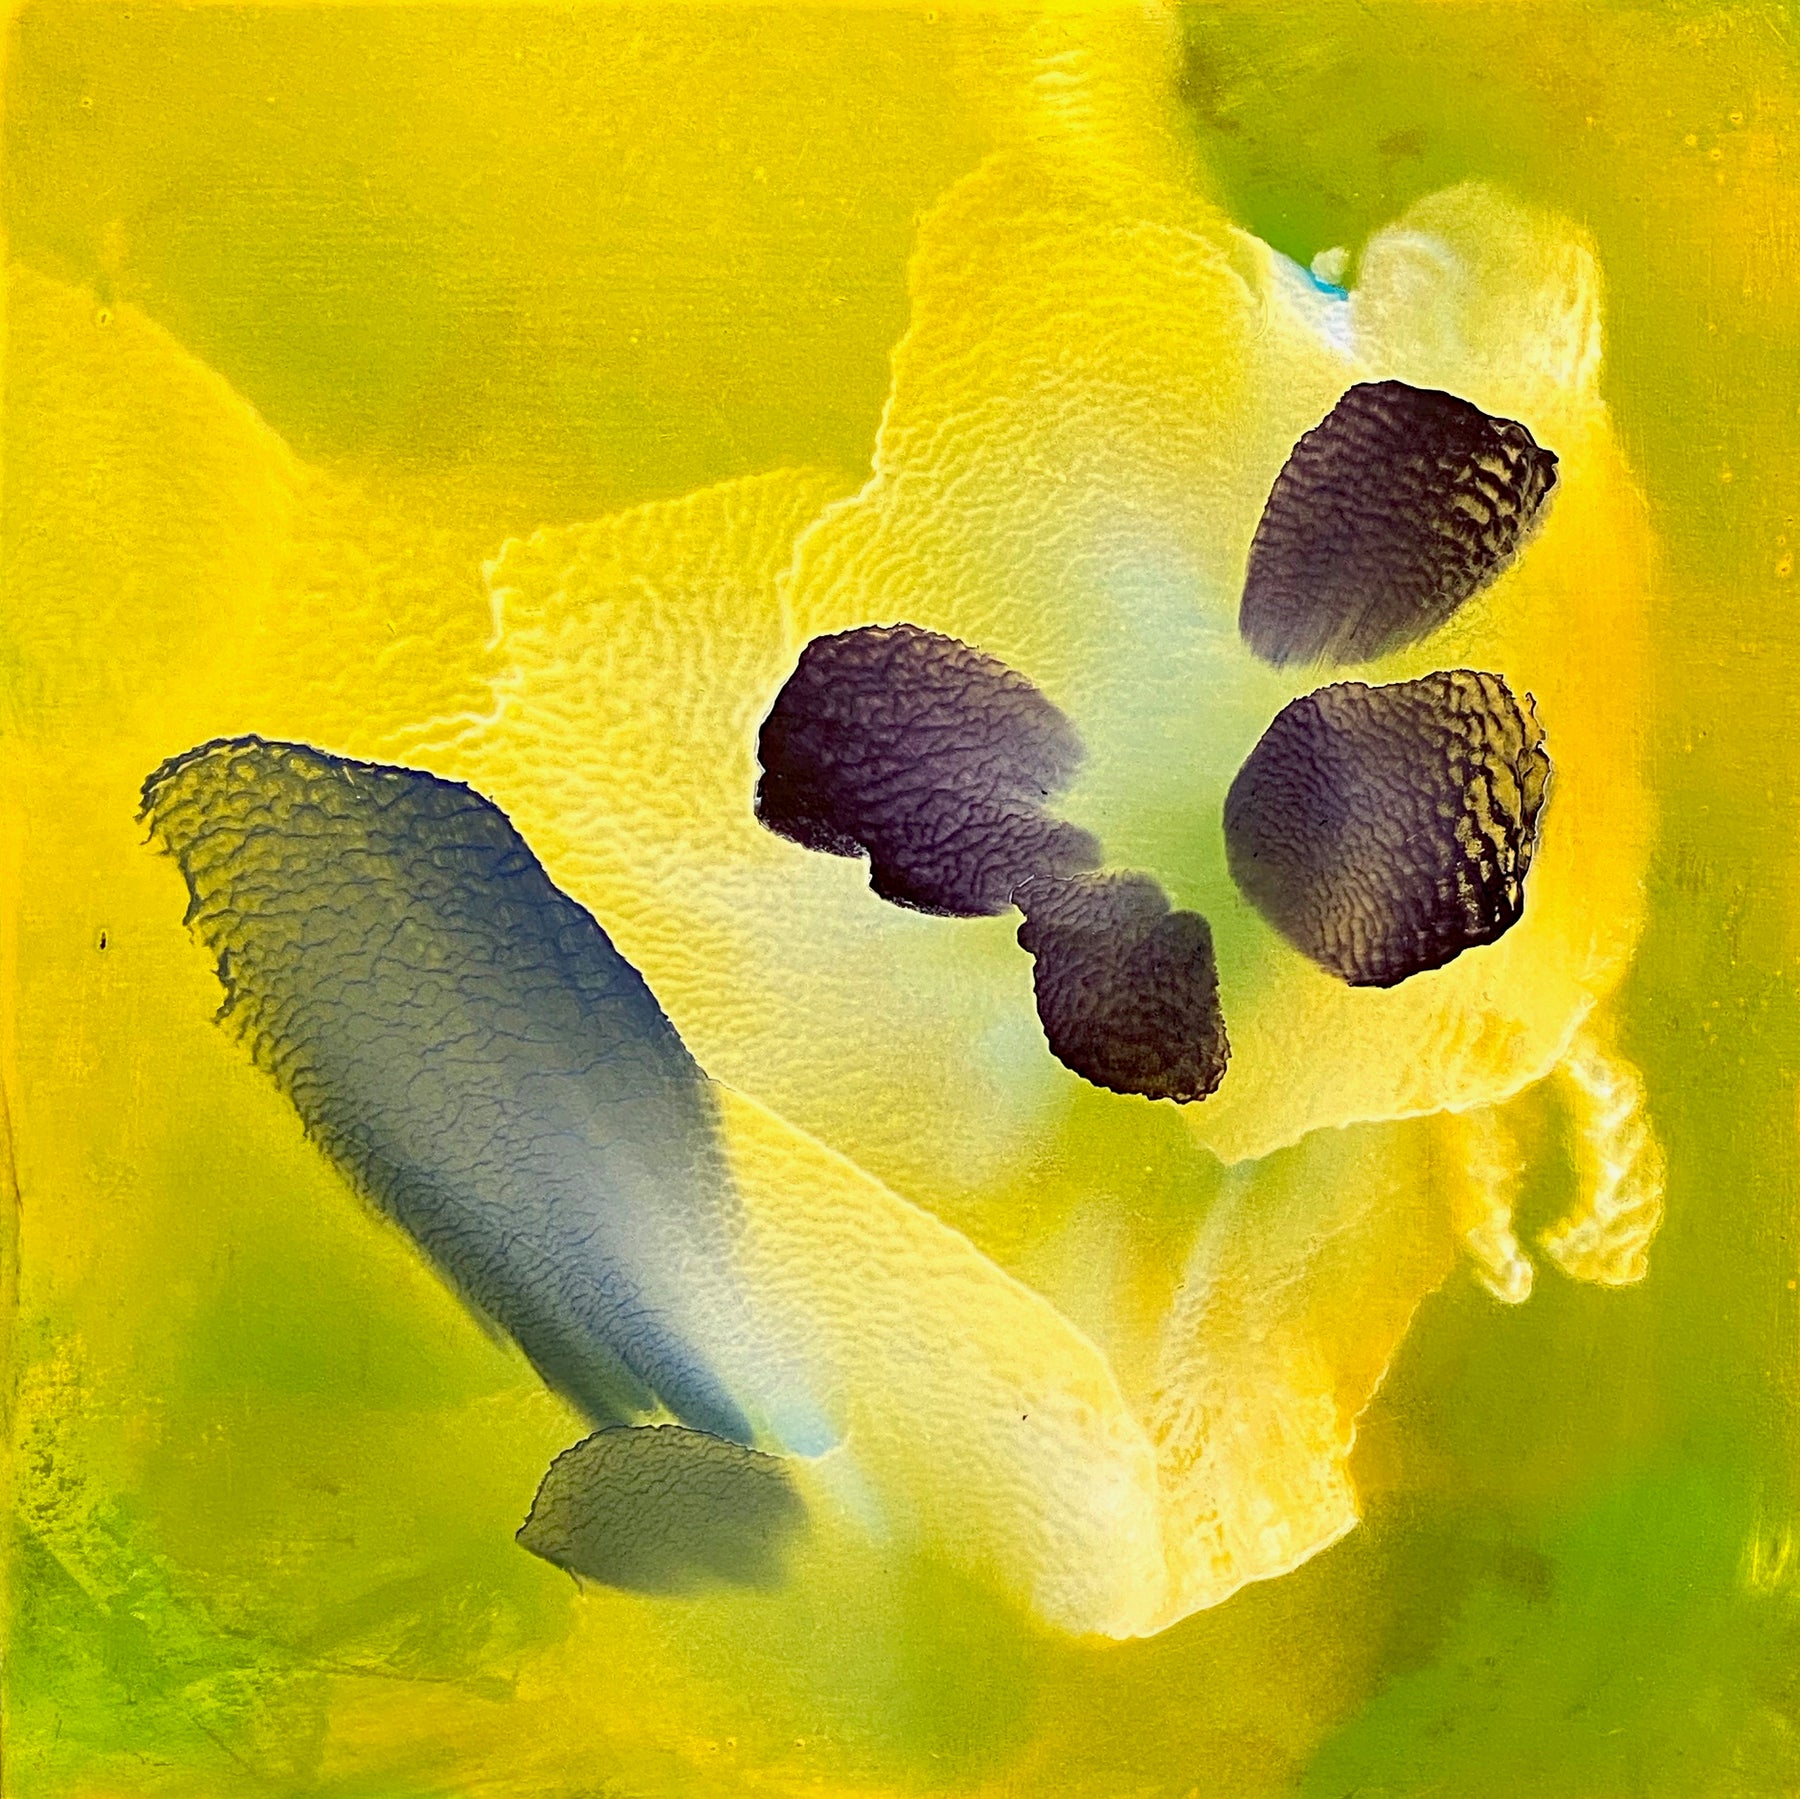 Abstract oil painting of a yellow flower-like figure by Usha Shukla.